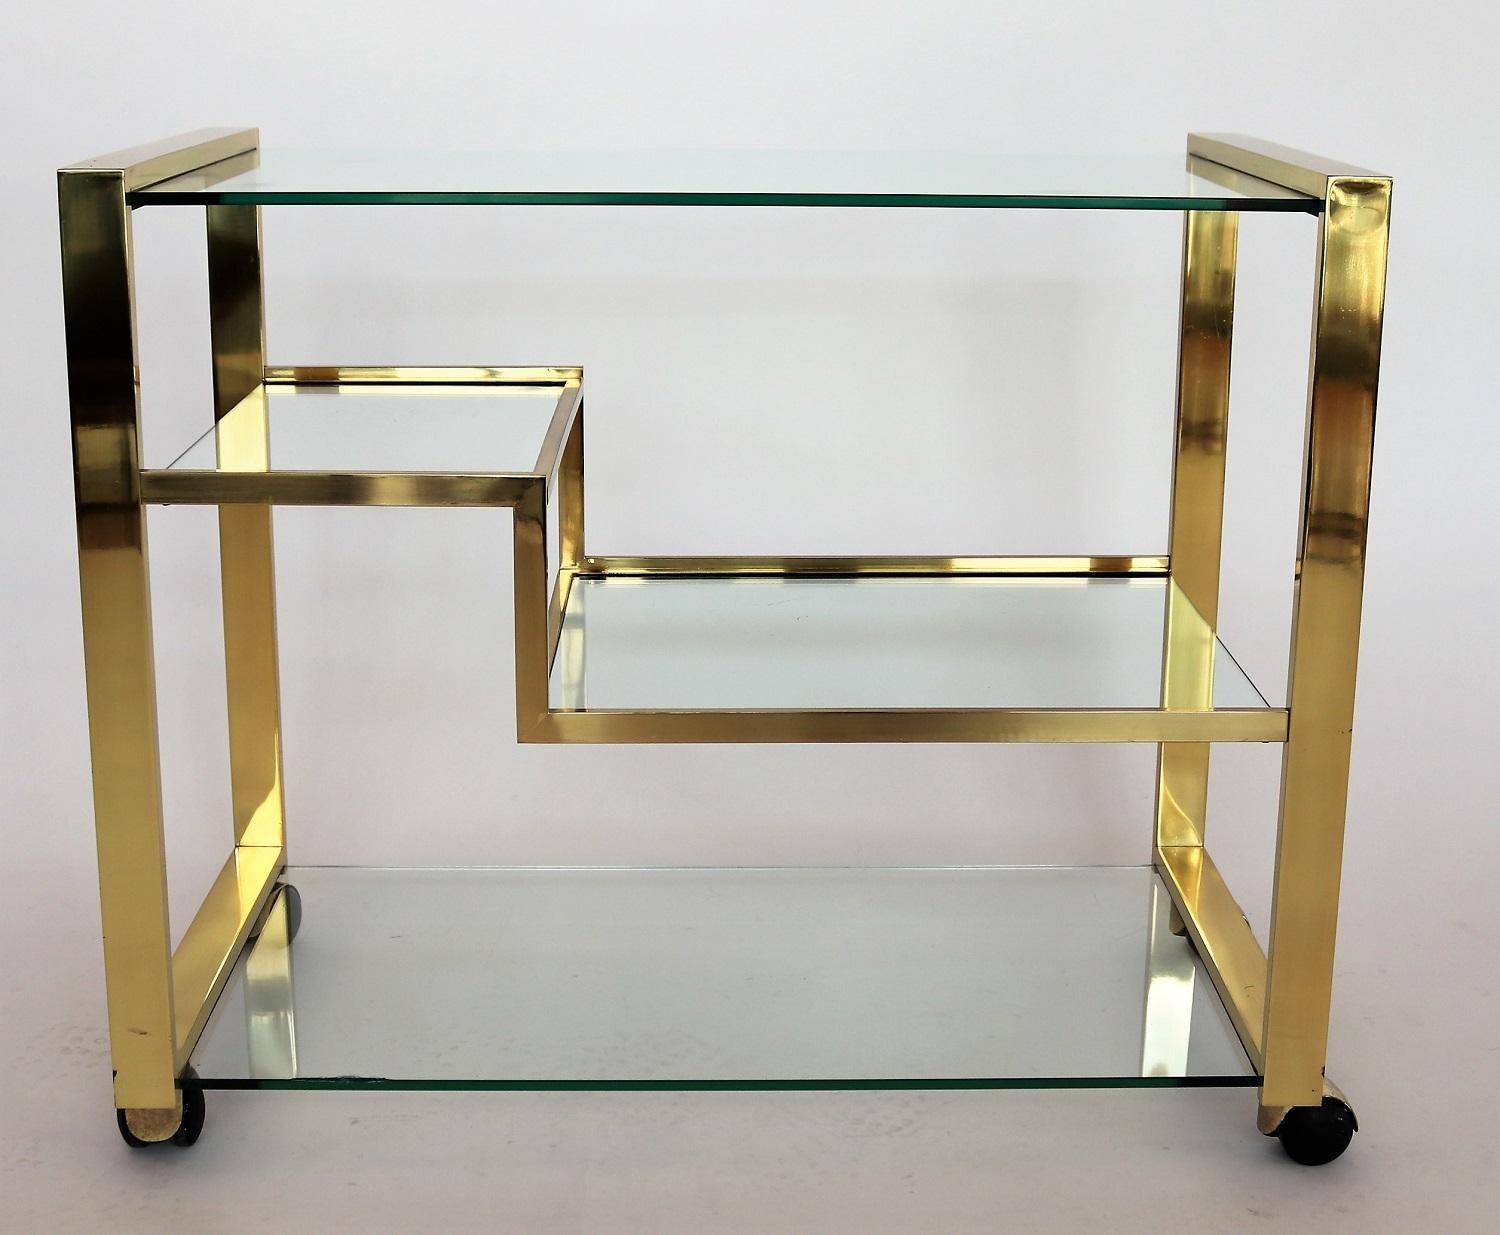 Beautiful bar cart or trolley made of full shiny brass and strong glass plates.
Made in the Hollywood Regency style of the 1970s in Italy.
The 4 rollers are working smoothly.
The trolley is in very good vintage condition.